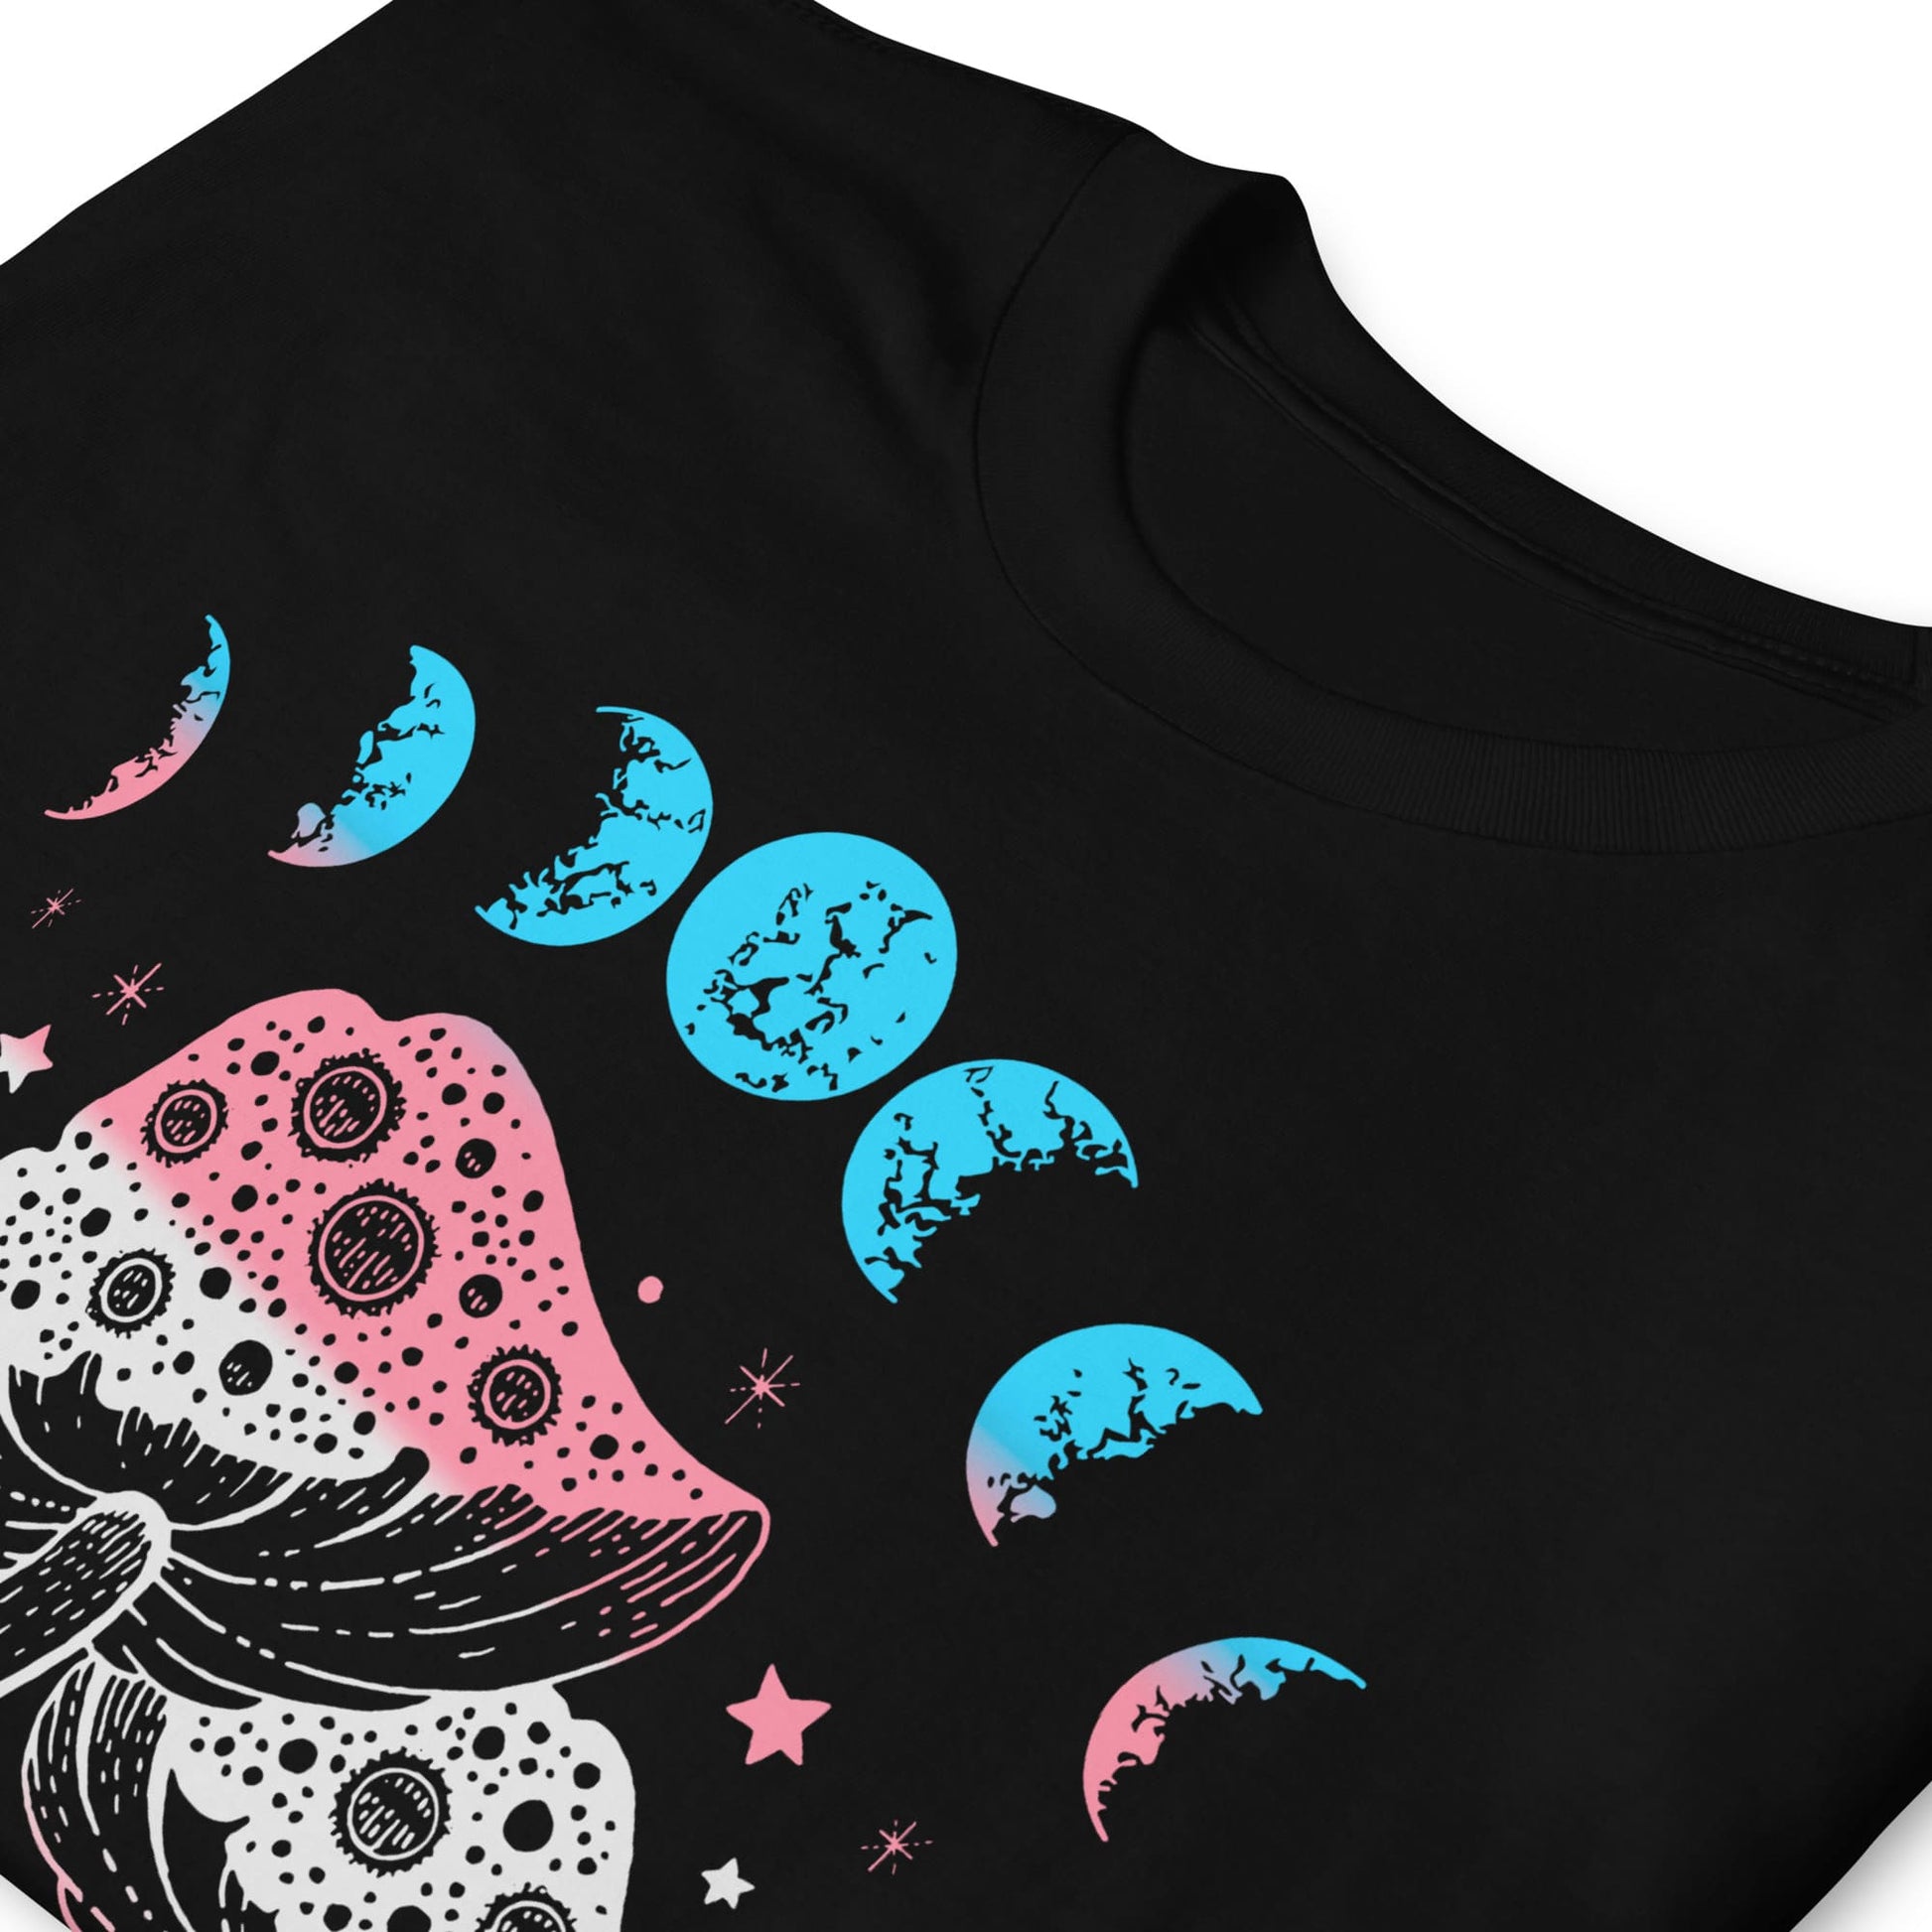 transgender tee shirt, cottagecore design with frog, mushrooms and moon phases, zoom